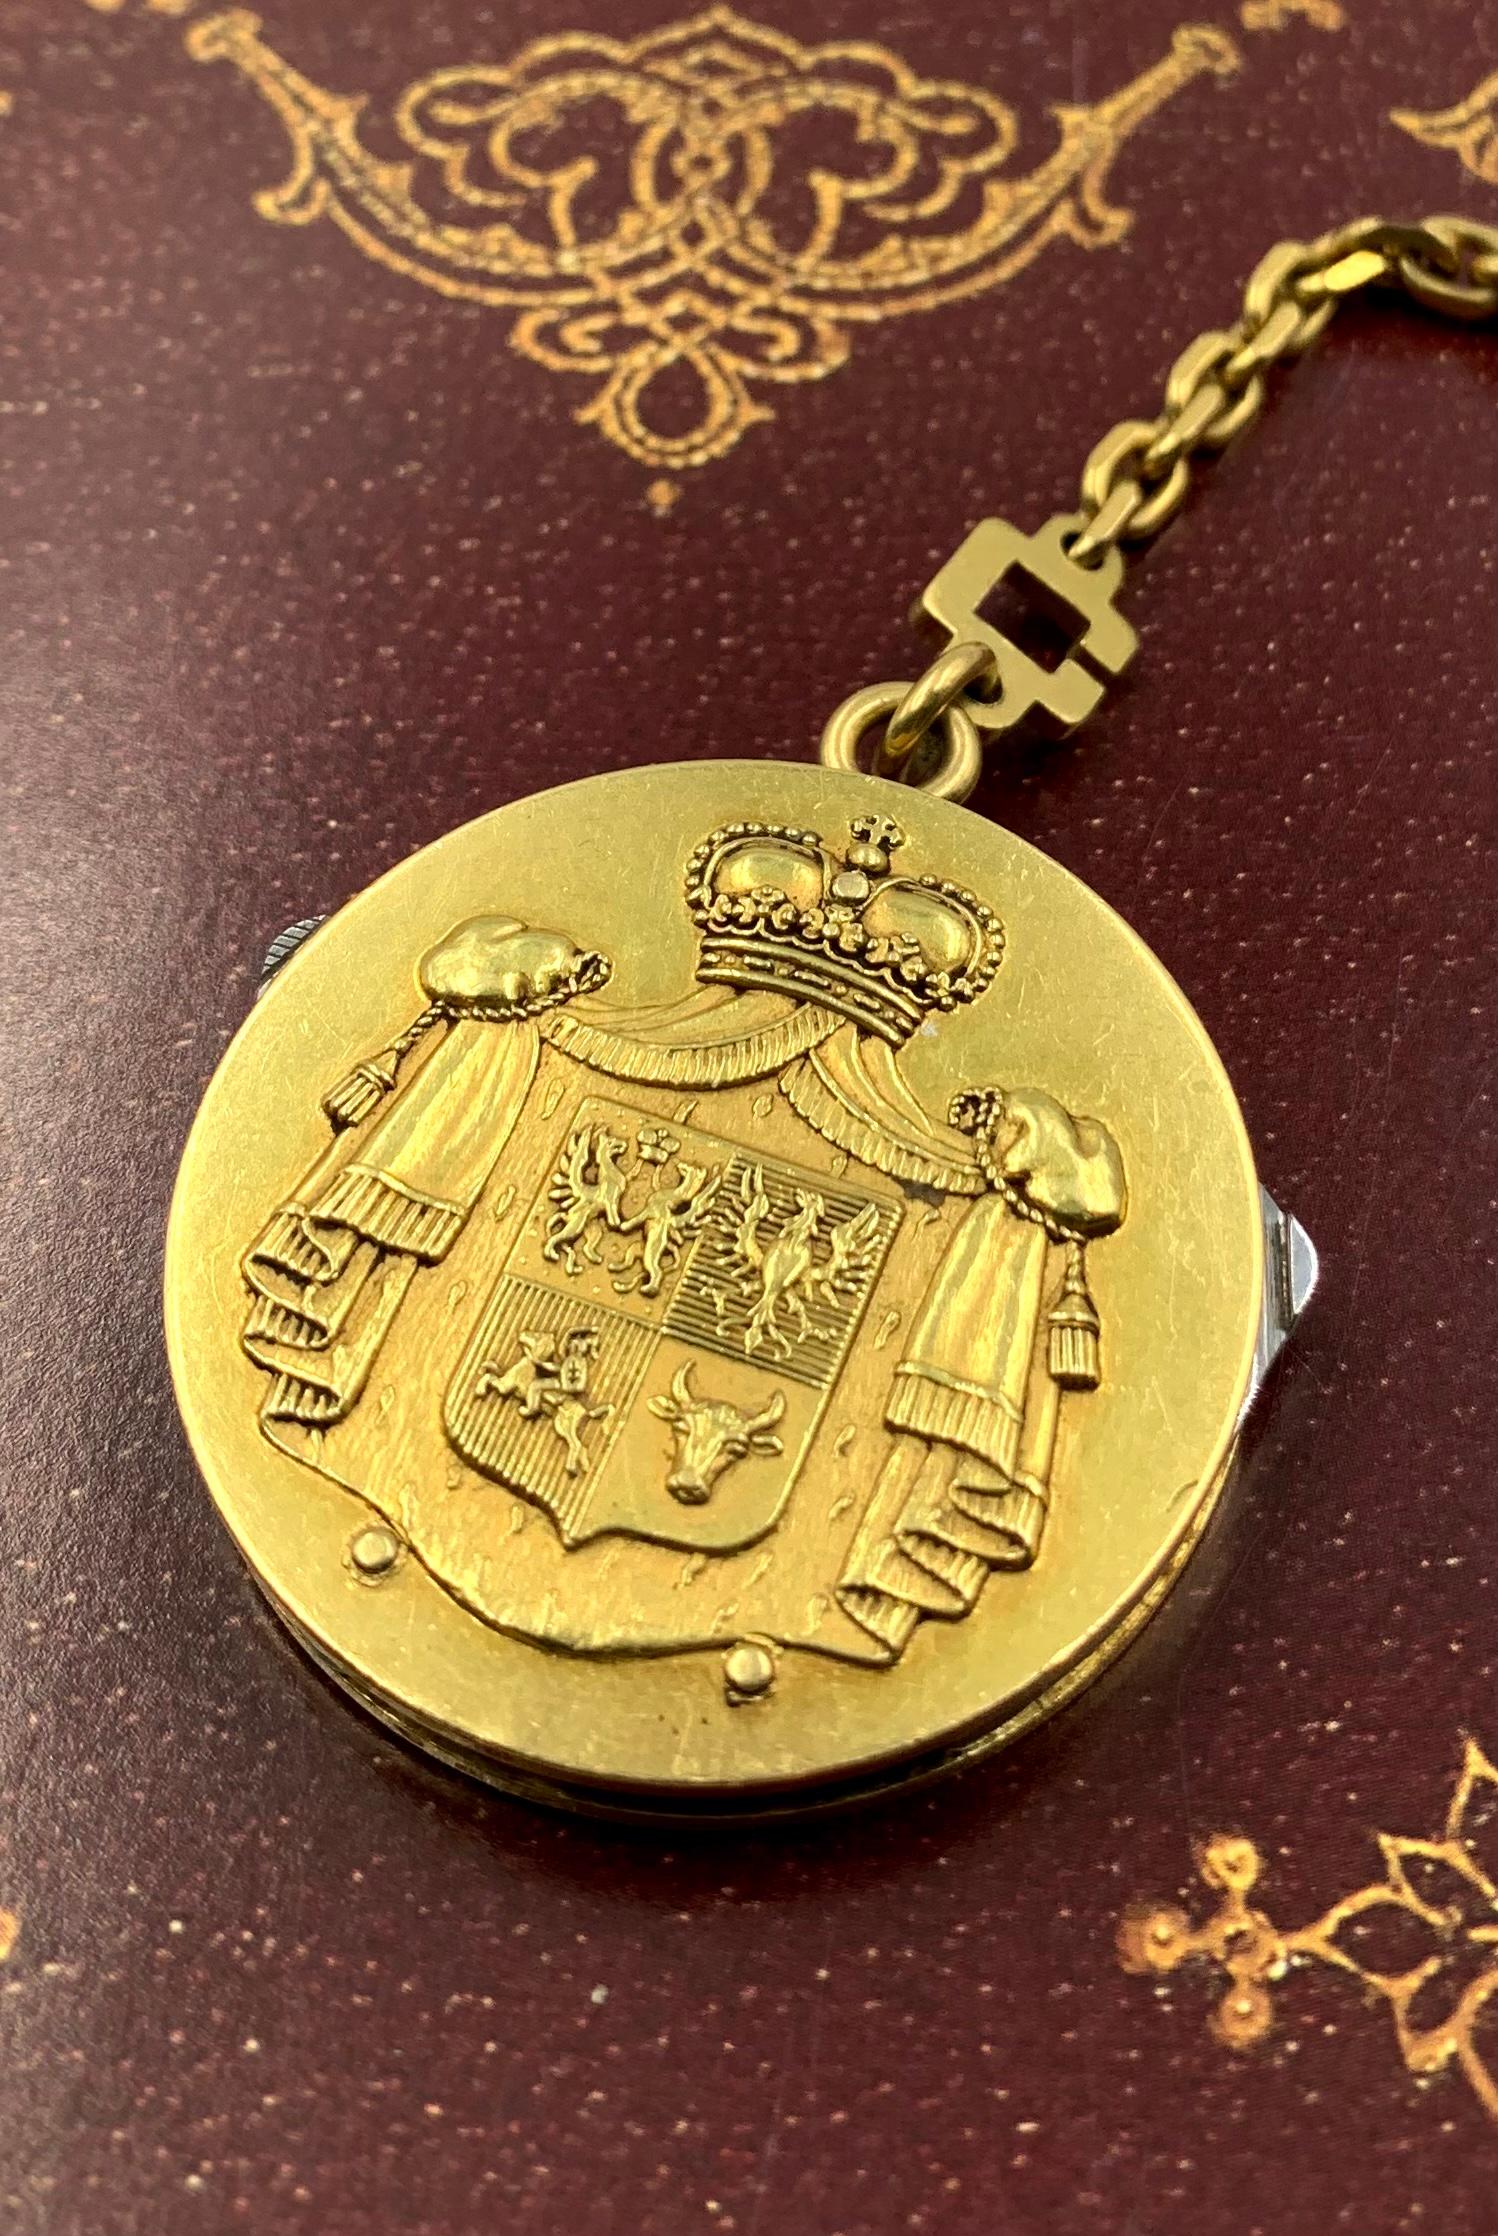 A large 18K yellow gold Prince Troubetskoy Russian Armorial cigar fob tool medallion created by Maison Arthus Bertrand with Eloi Pernet surgical steel cutting mechanism which includes cigar scissors, file and knife.
1940's
This unique 18K gold cigar